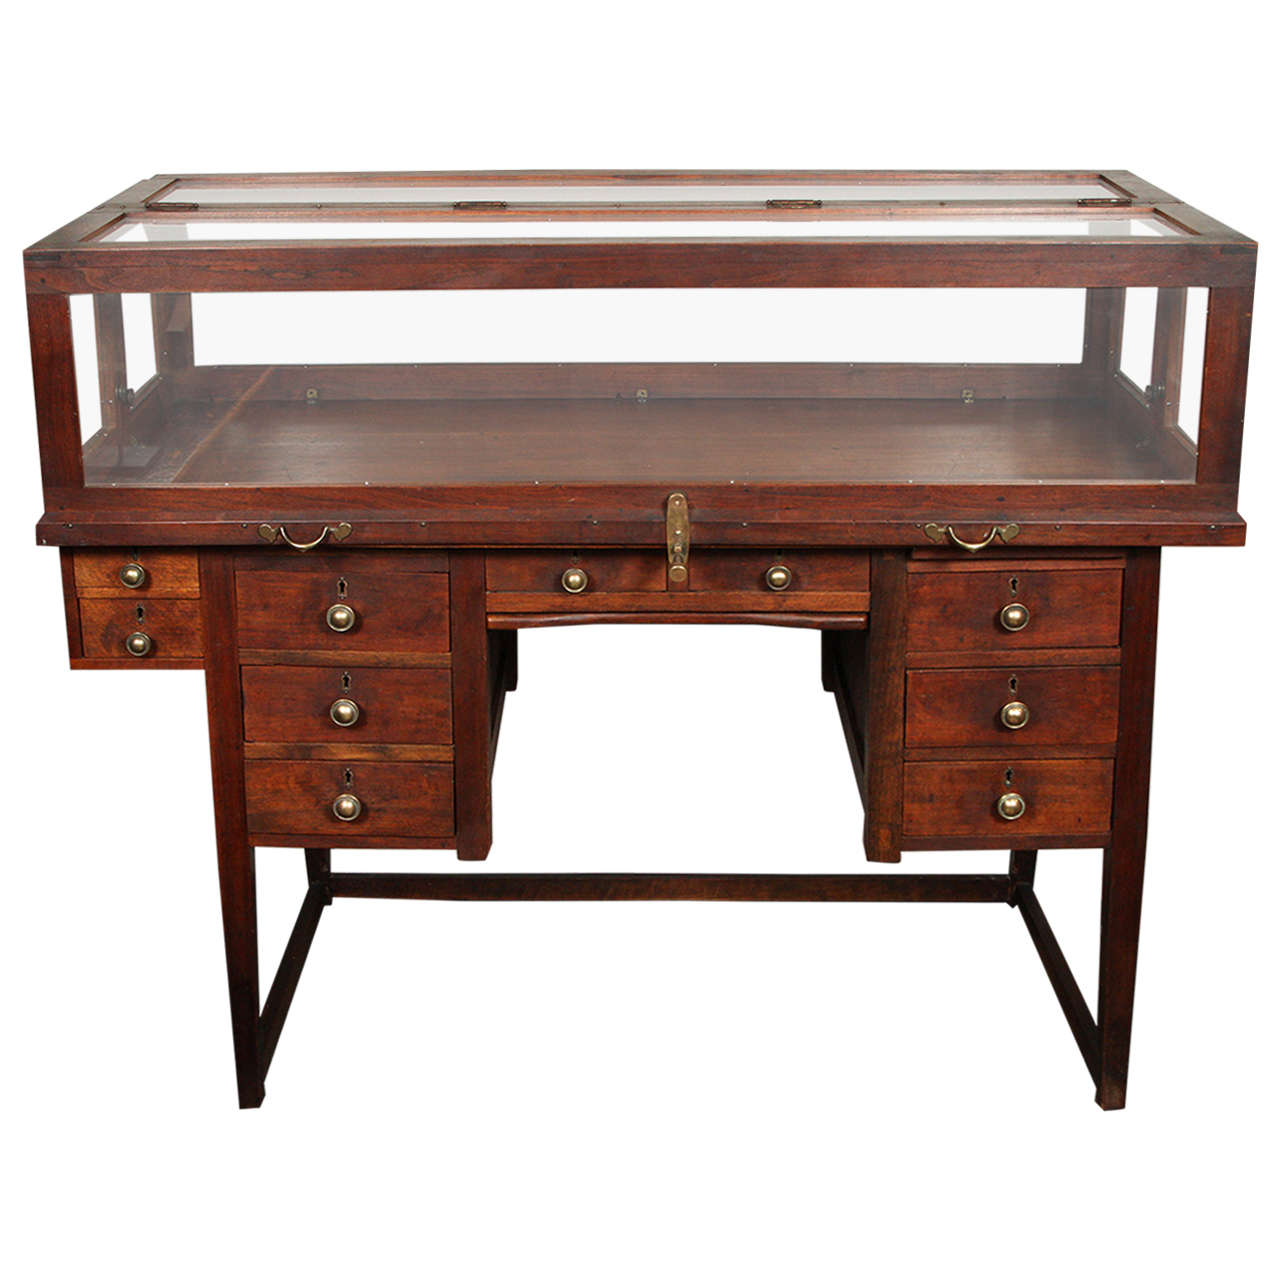 Unique 19th Century English Jeweler's Work Desk and Display Case